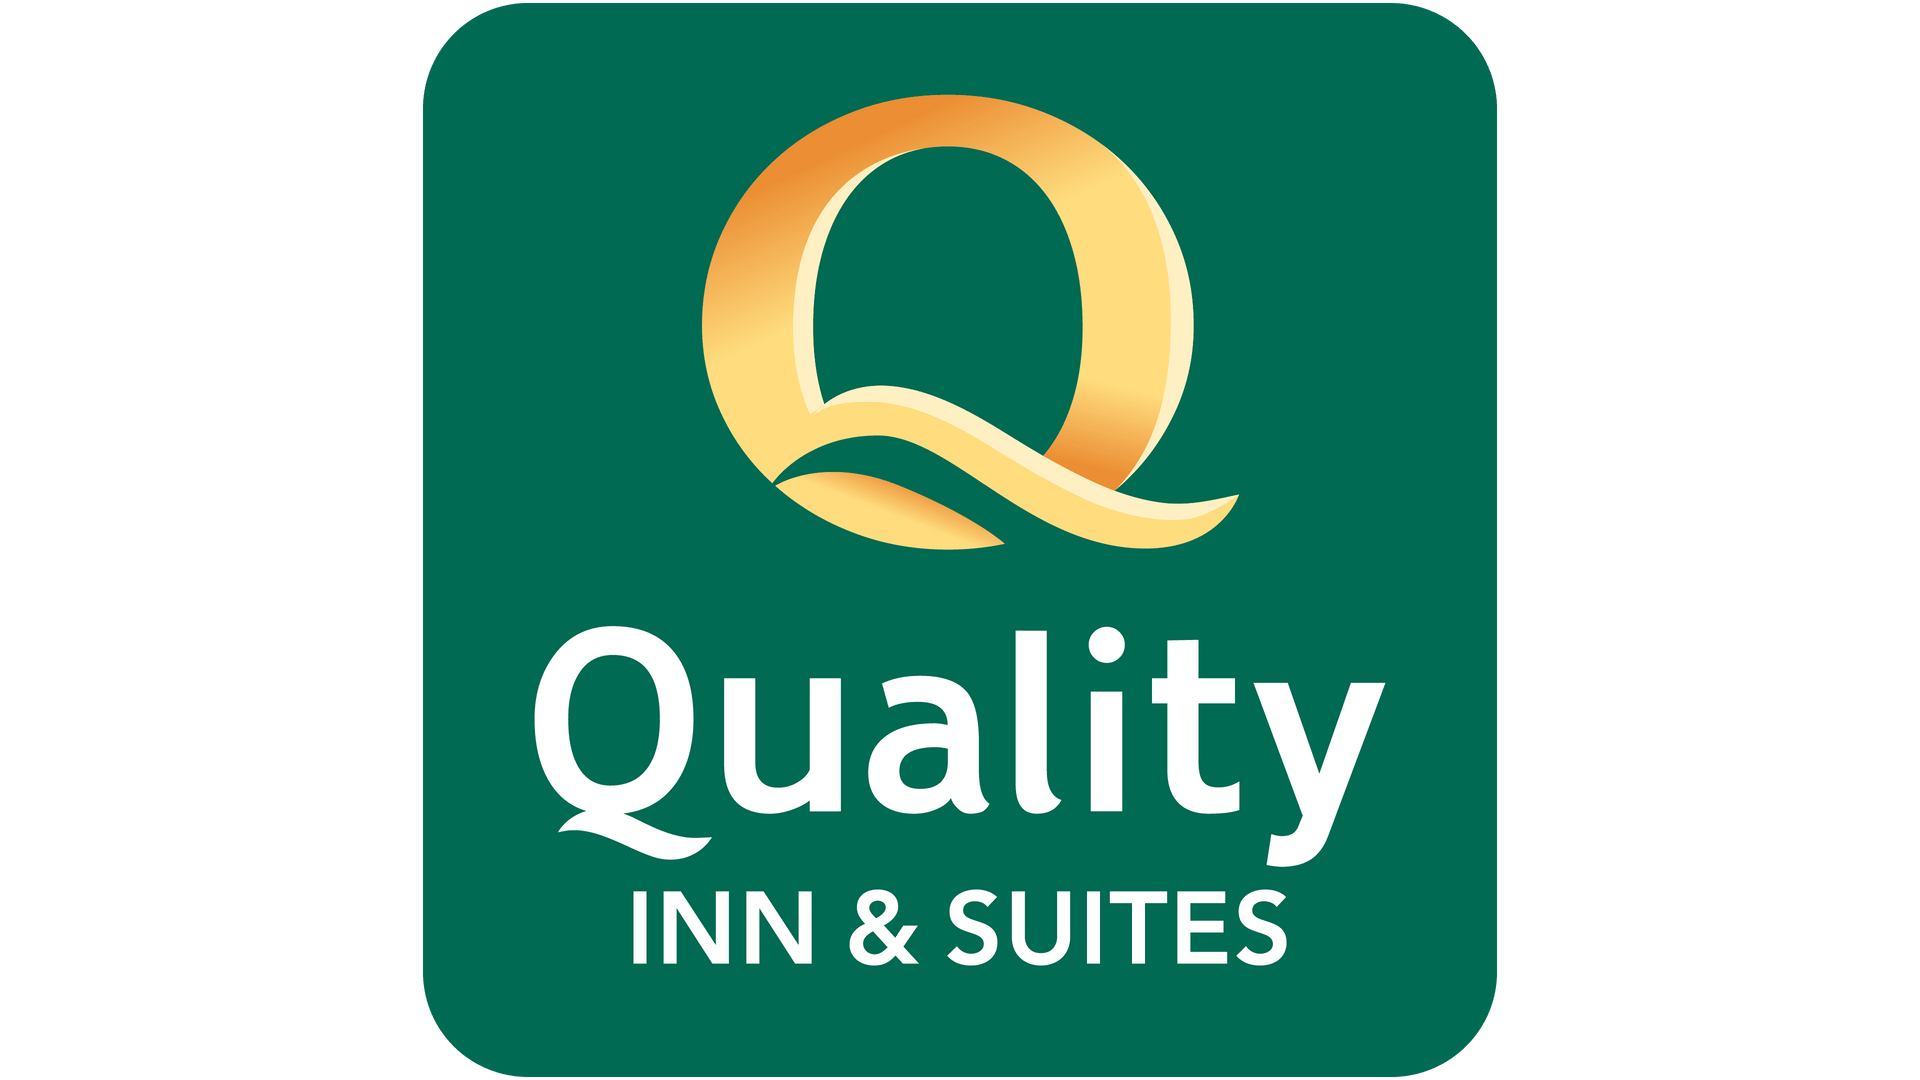 the quality inn and suites logo is green and gold .